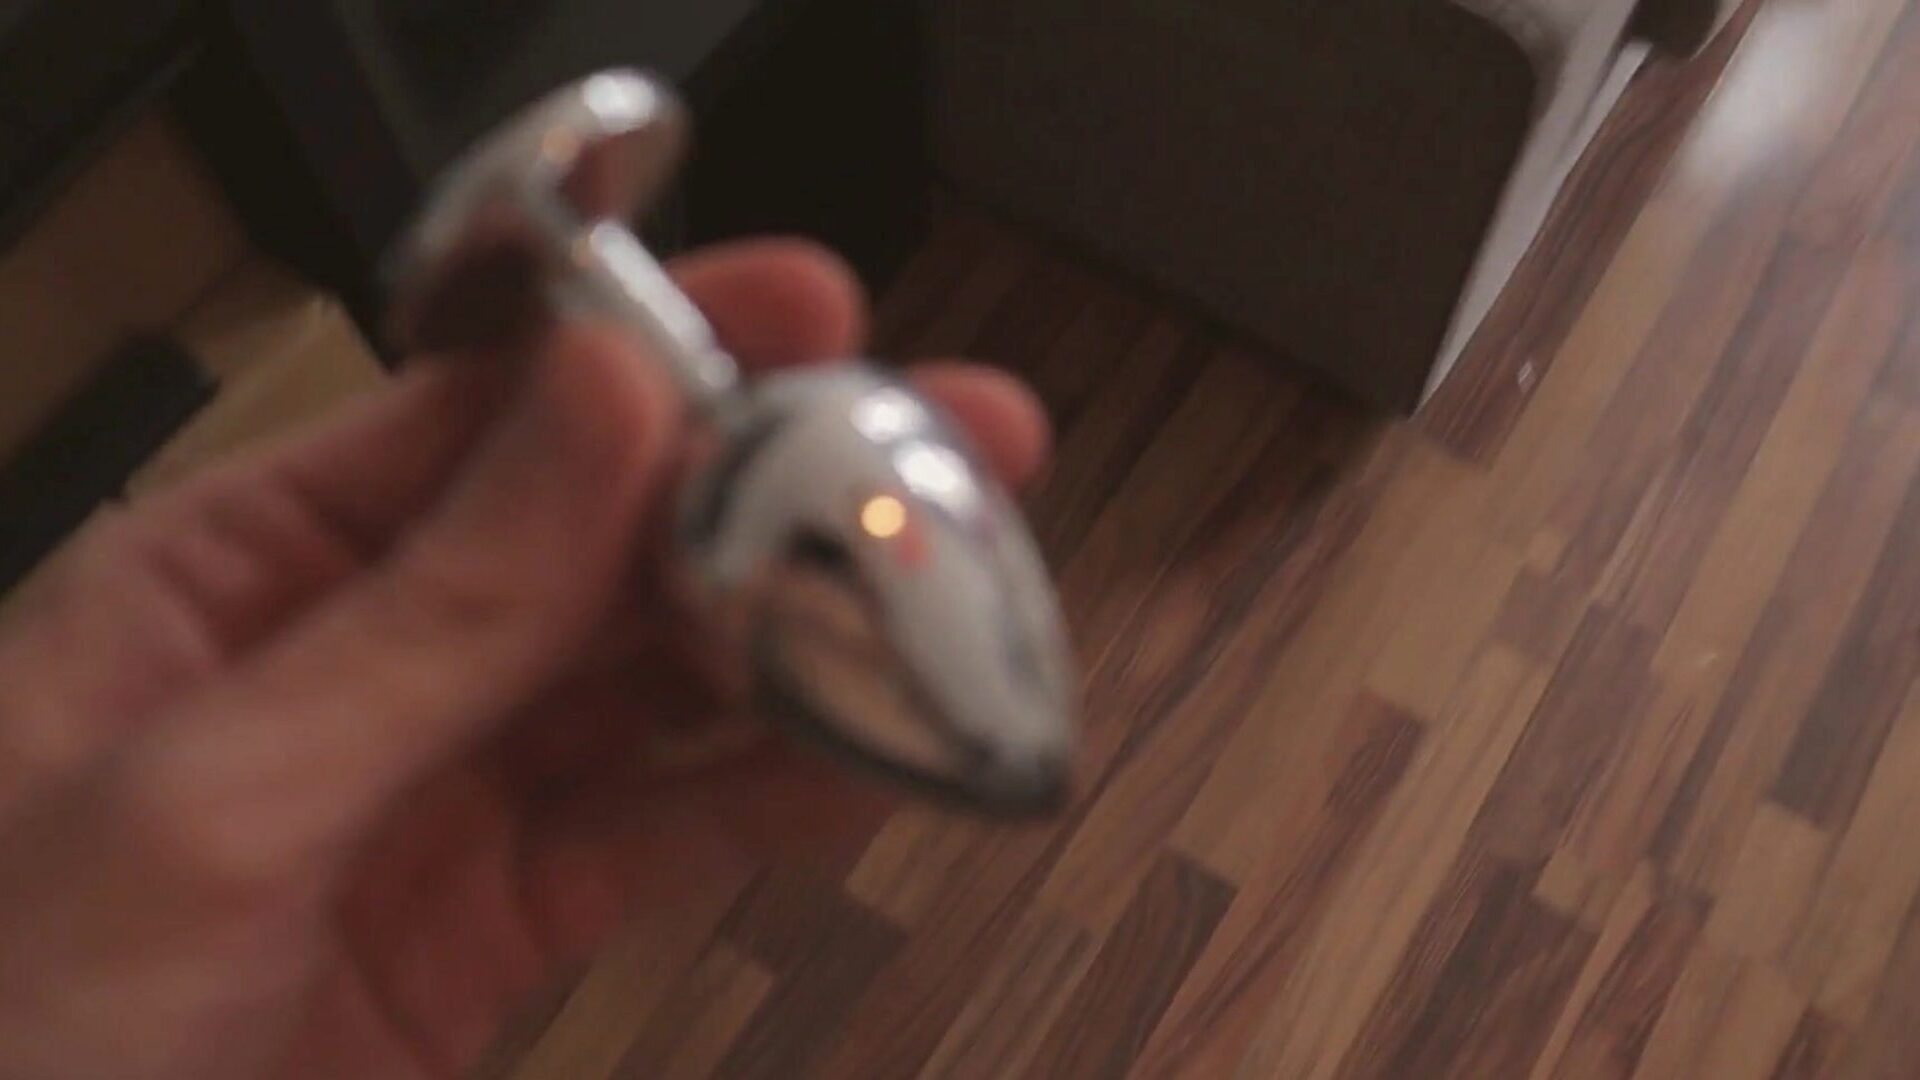 Found my Step Sister's Toy and made her Show me how to use it ANAL PLUG